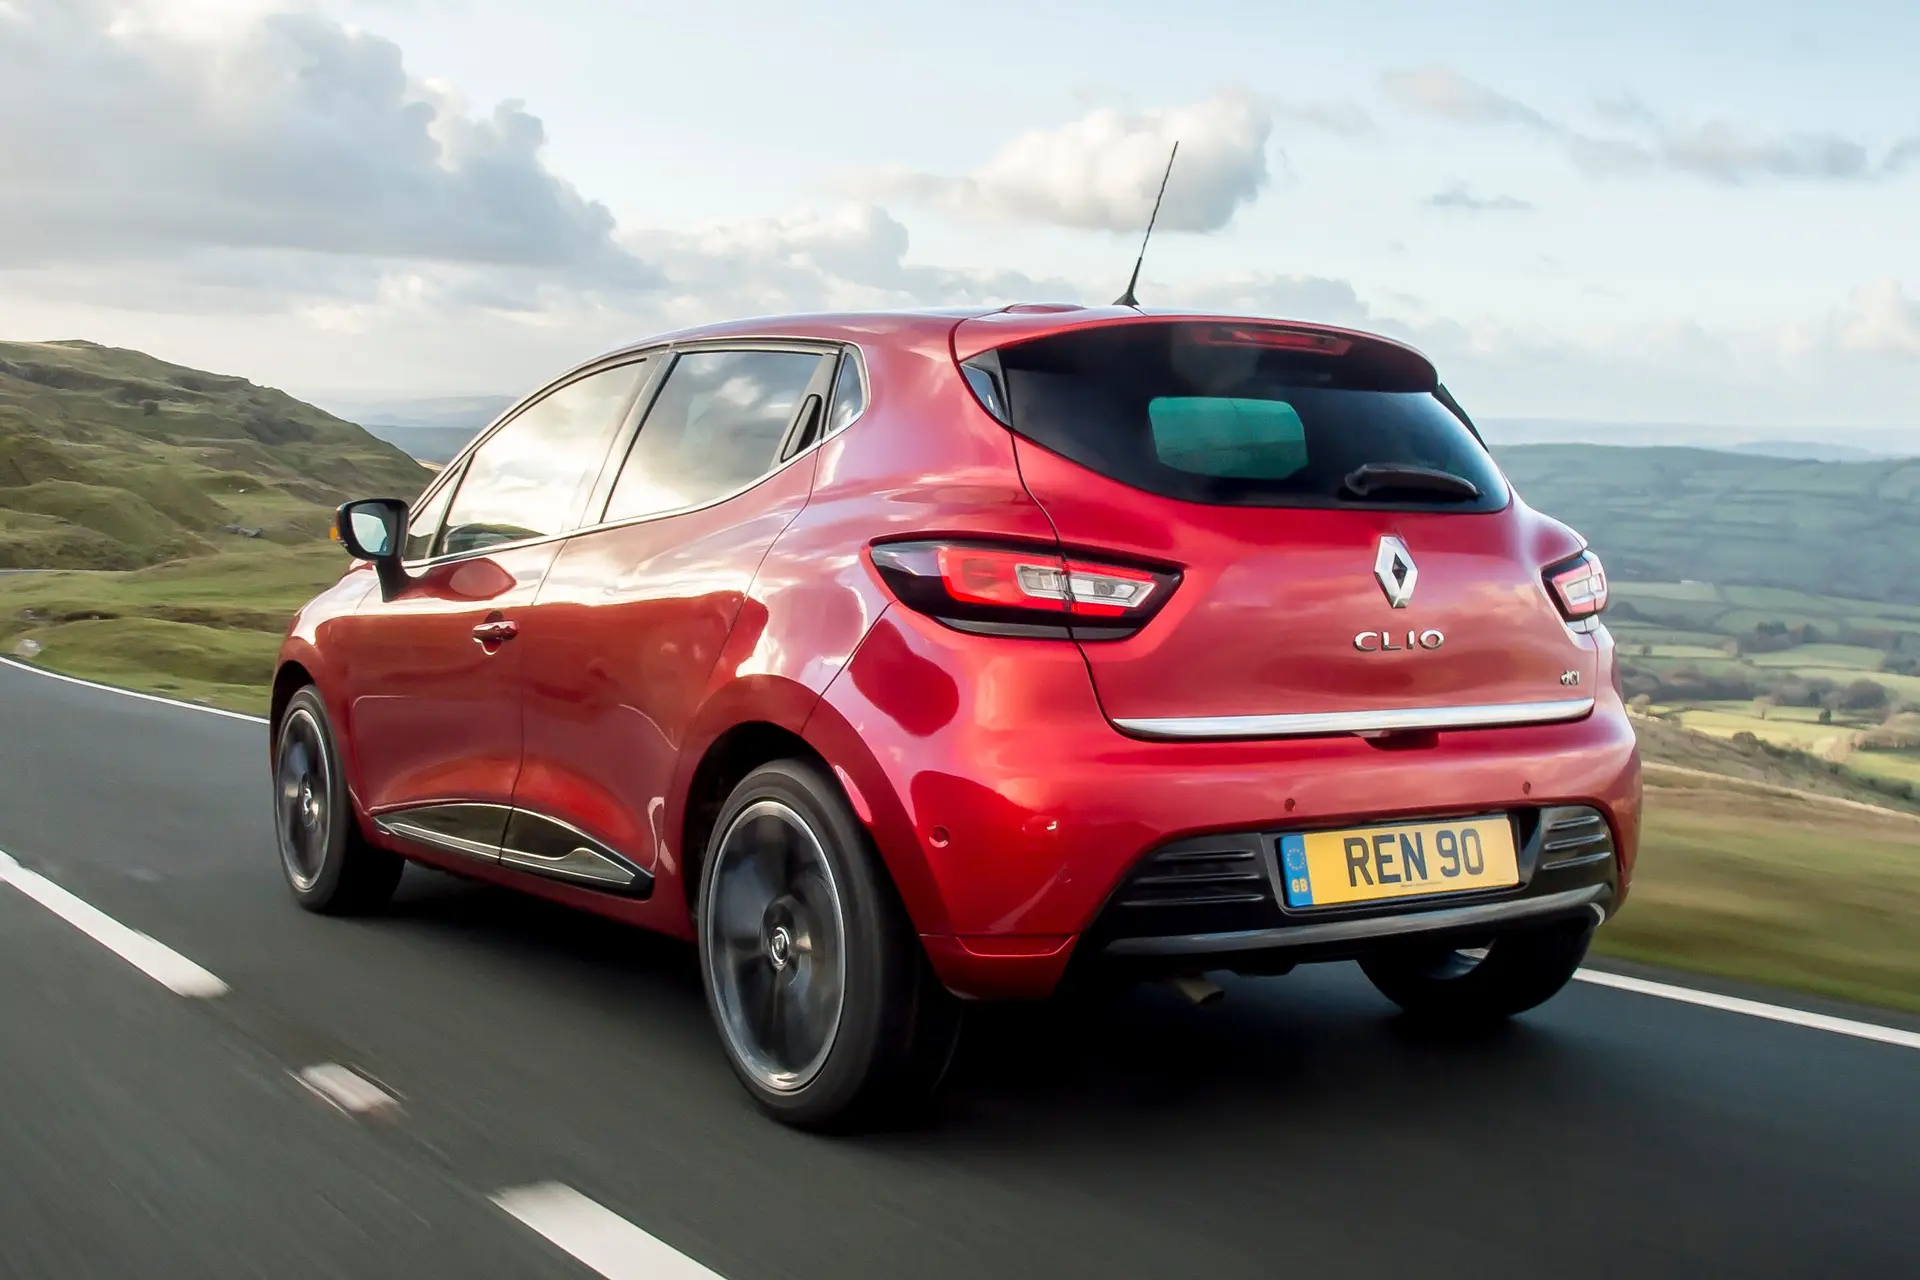 Renault Clio (2013-2019) Review: exterior rear three quarter photo of the Renault Clio on the road